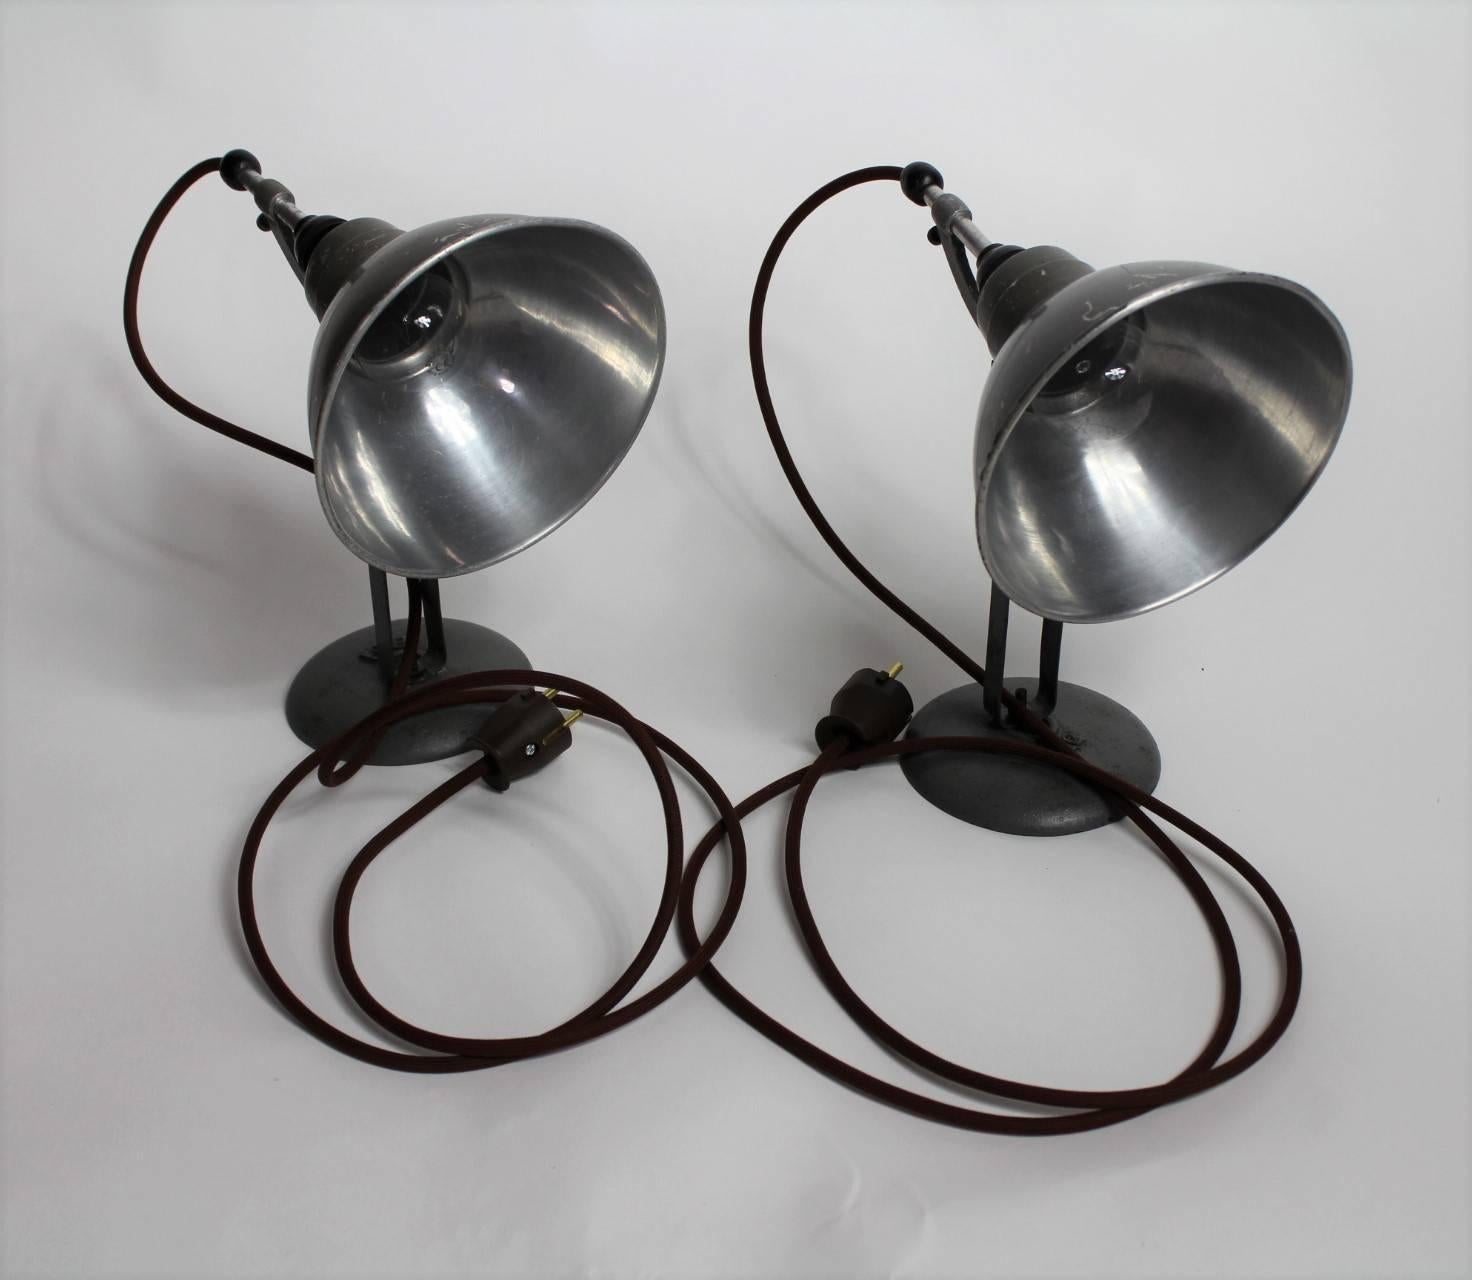 Pair of small Industrial table lamps manufactured in the 1930s in Switzerland by Bag. The lamps are made from a steel base and adjustable aluminium shades (diameter 7”). Great patina, new electrical installation.